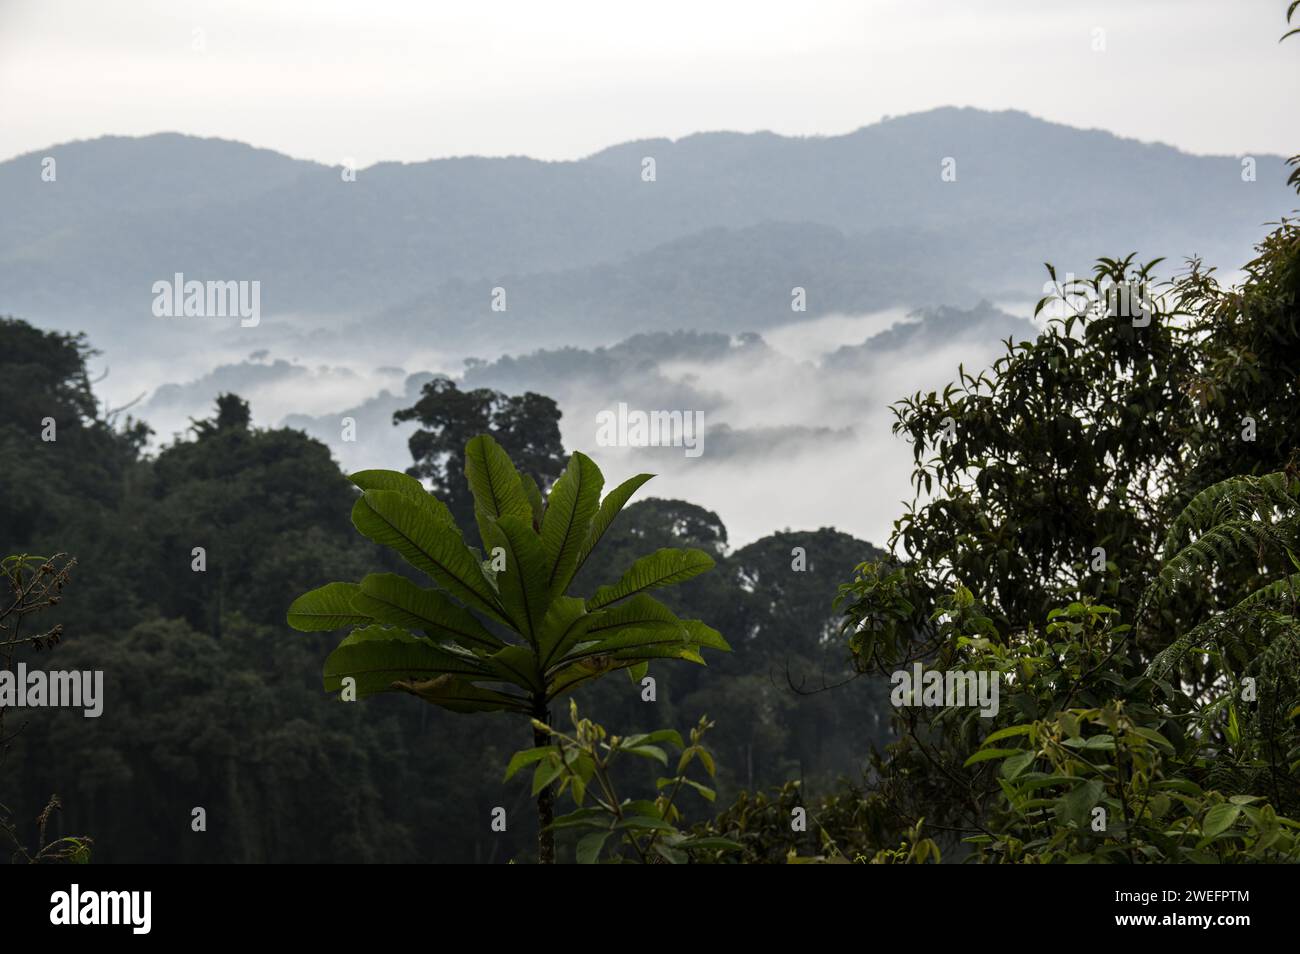 A misty morning in Nyungwe National Park in southwest Rwanda with foggy hills and lush forests on the trail to the canopy walk, a tourist attraction Stock Photo